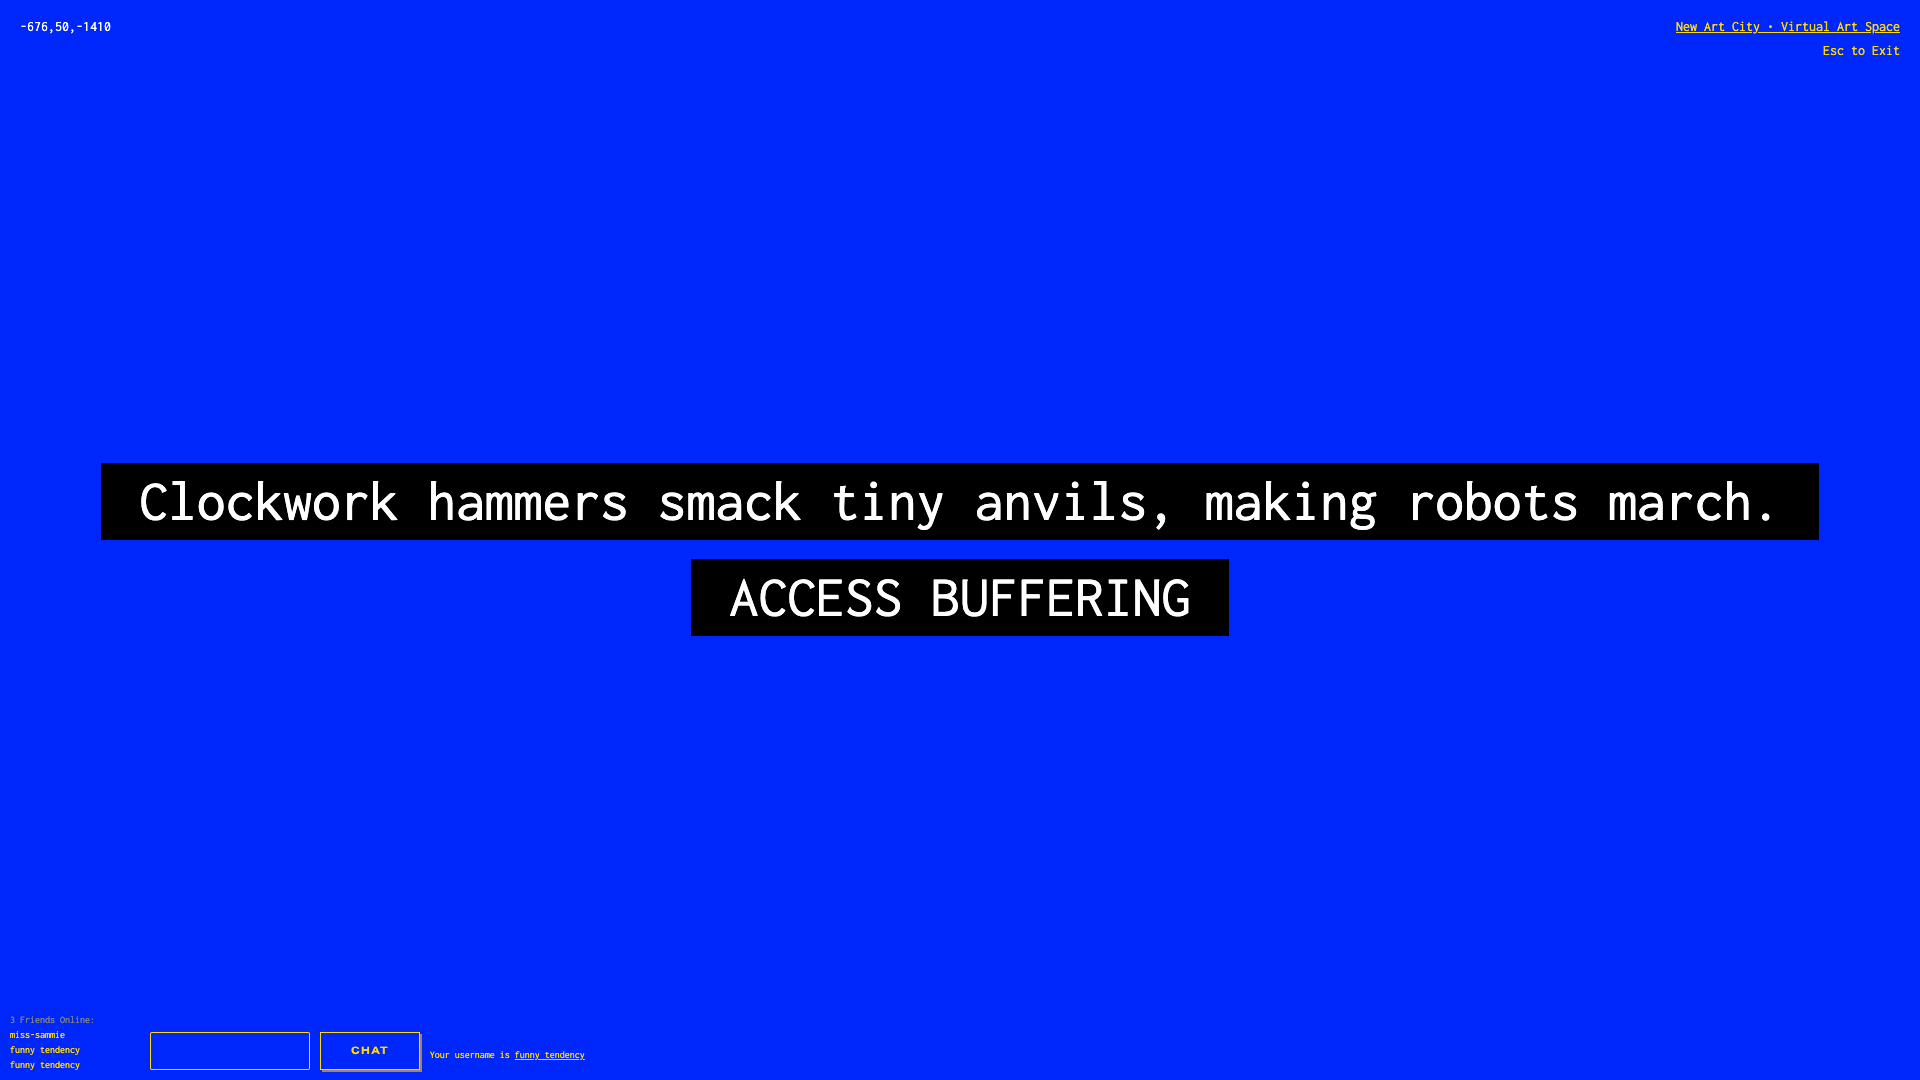 Deep blue screenshot, in the middle "Clockwork hammers smack tiny anvils, making robots march. ACCESS BUFFERING"